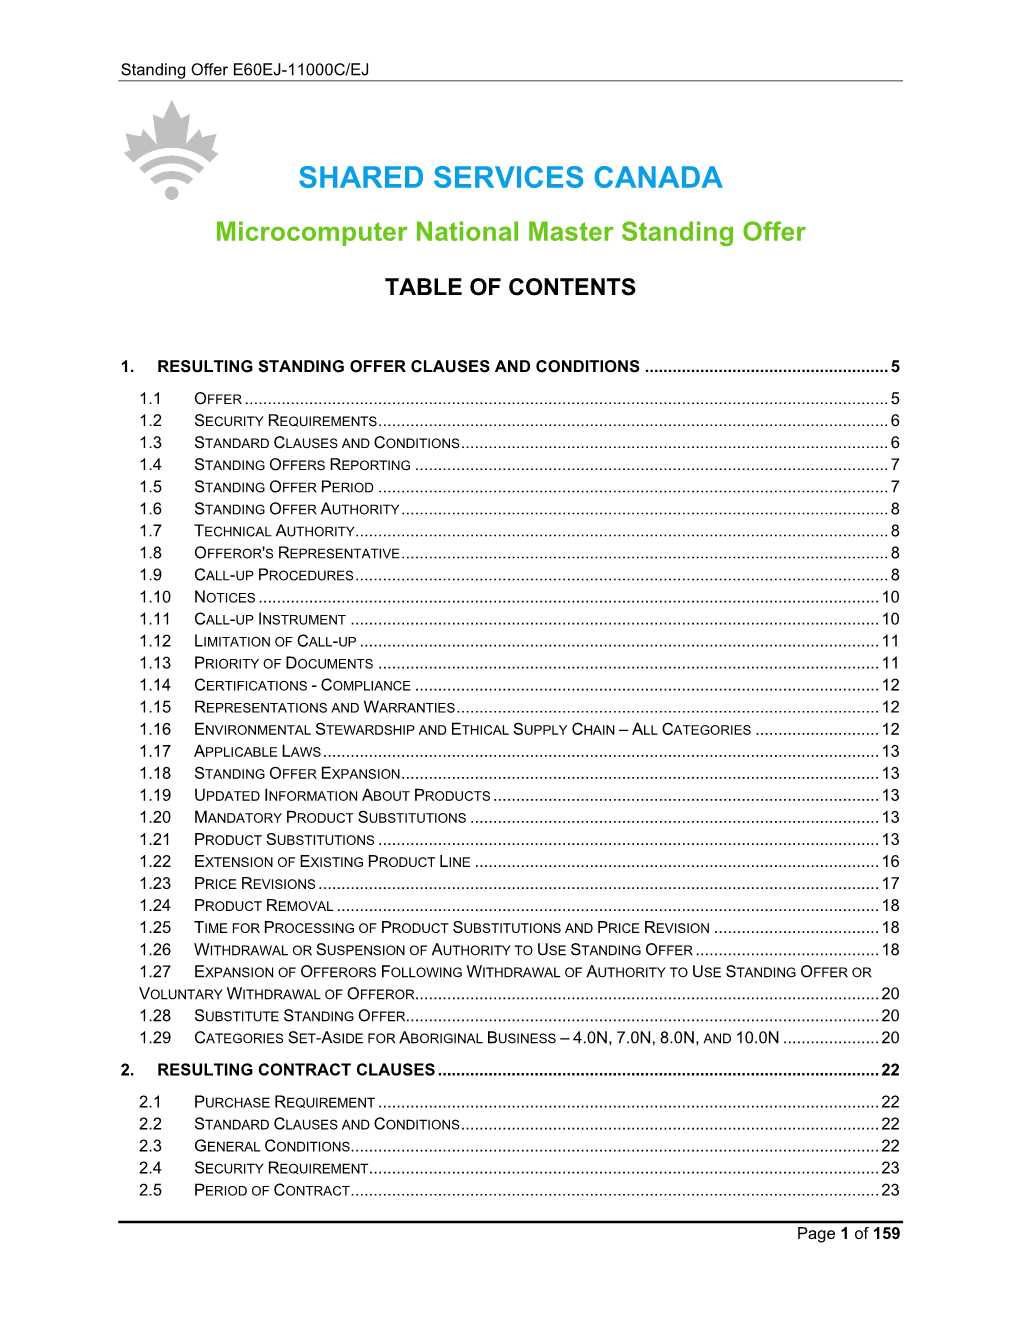 SHARED SERVICES CANADA Microcomputer National Master Standing Offer